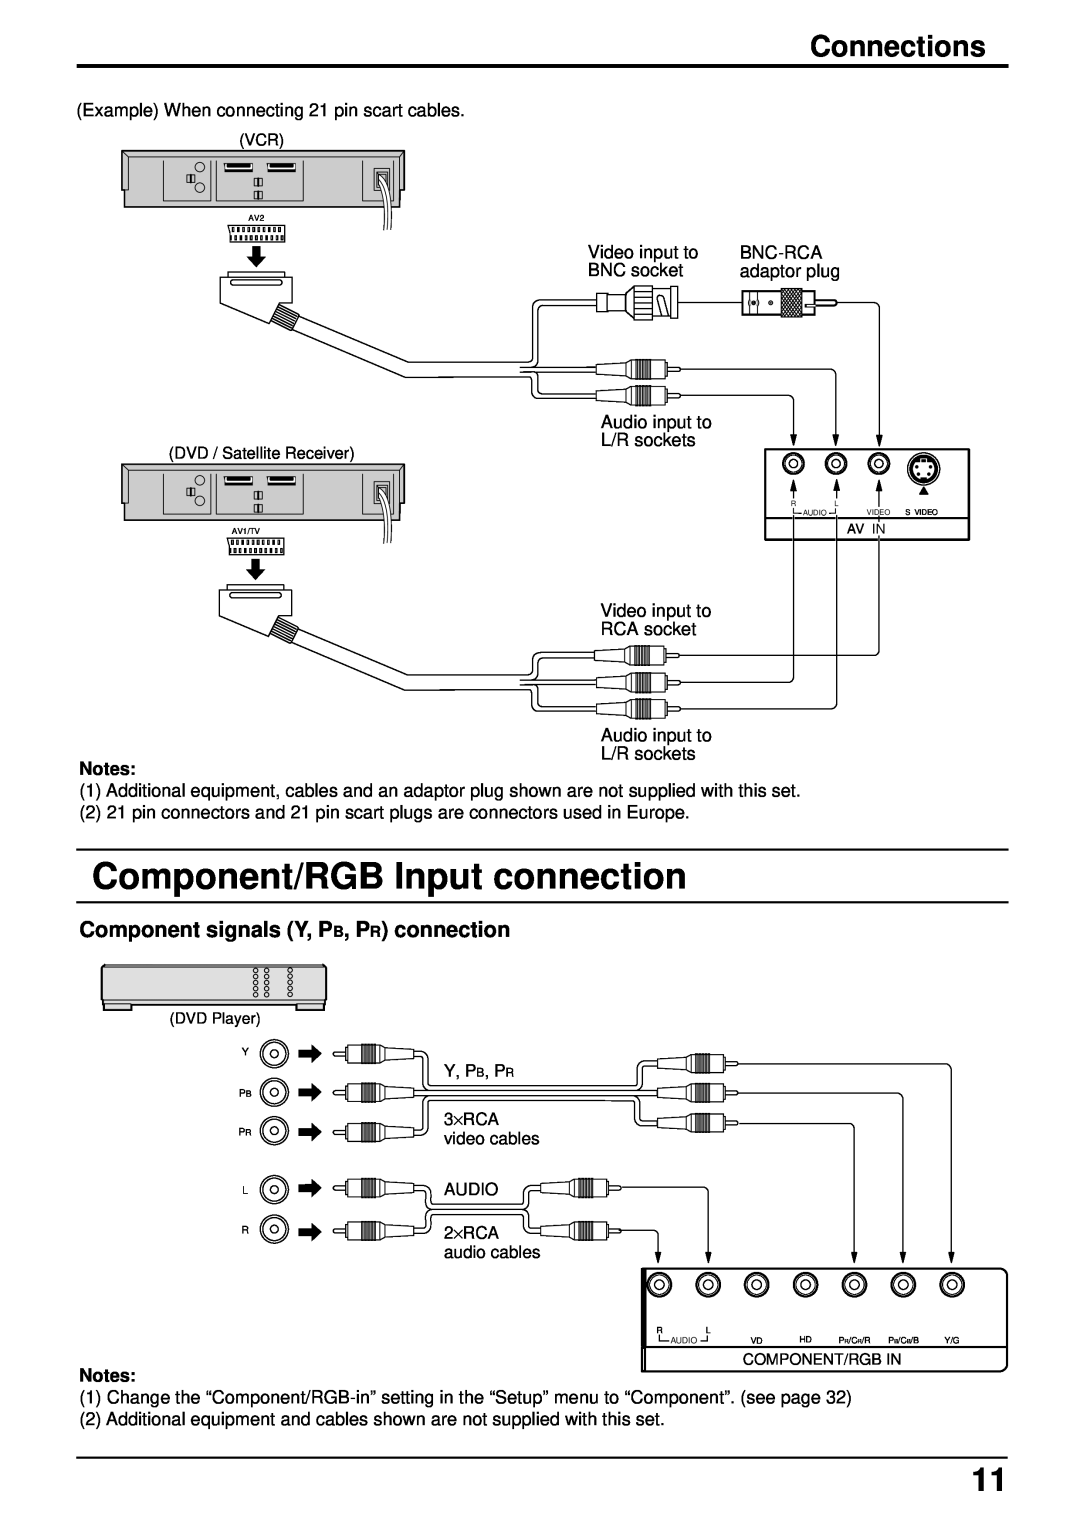 Panasonic TH-42PHW5, TH-50PHW5 manual Component/RGB Input connection, Component signals Y, PB, PR connection, Connections 